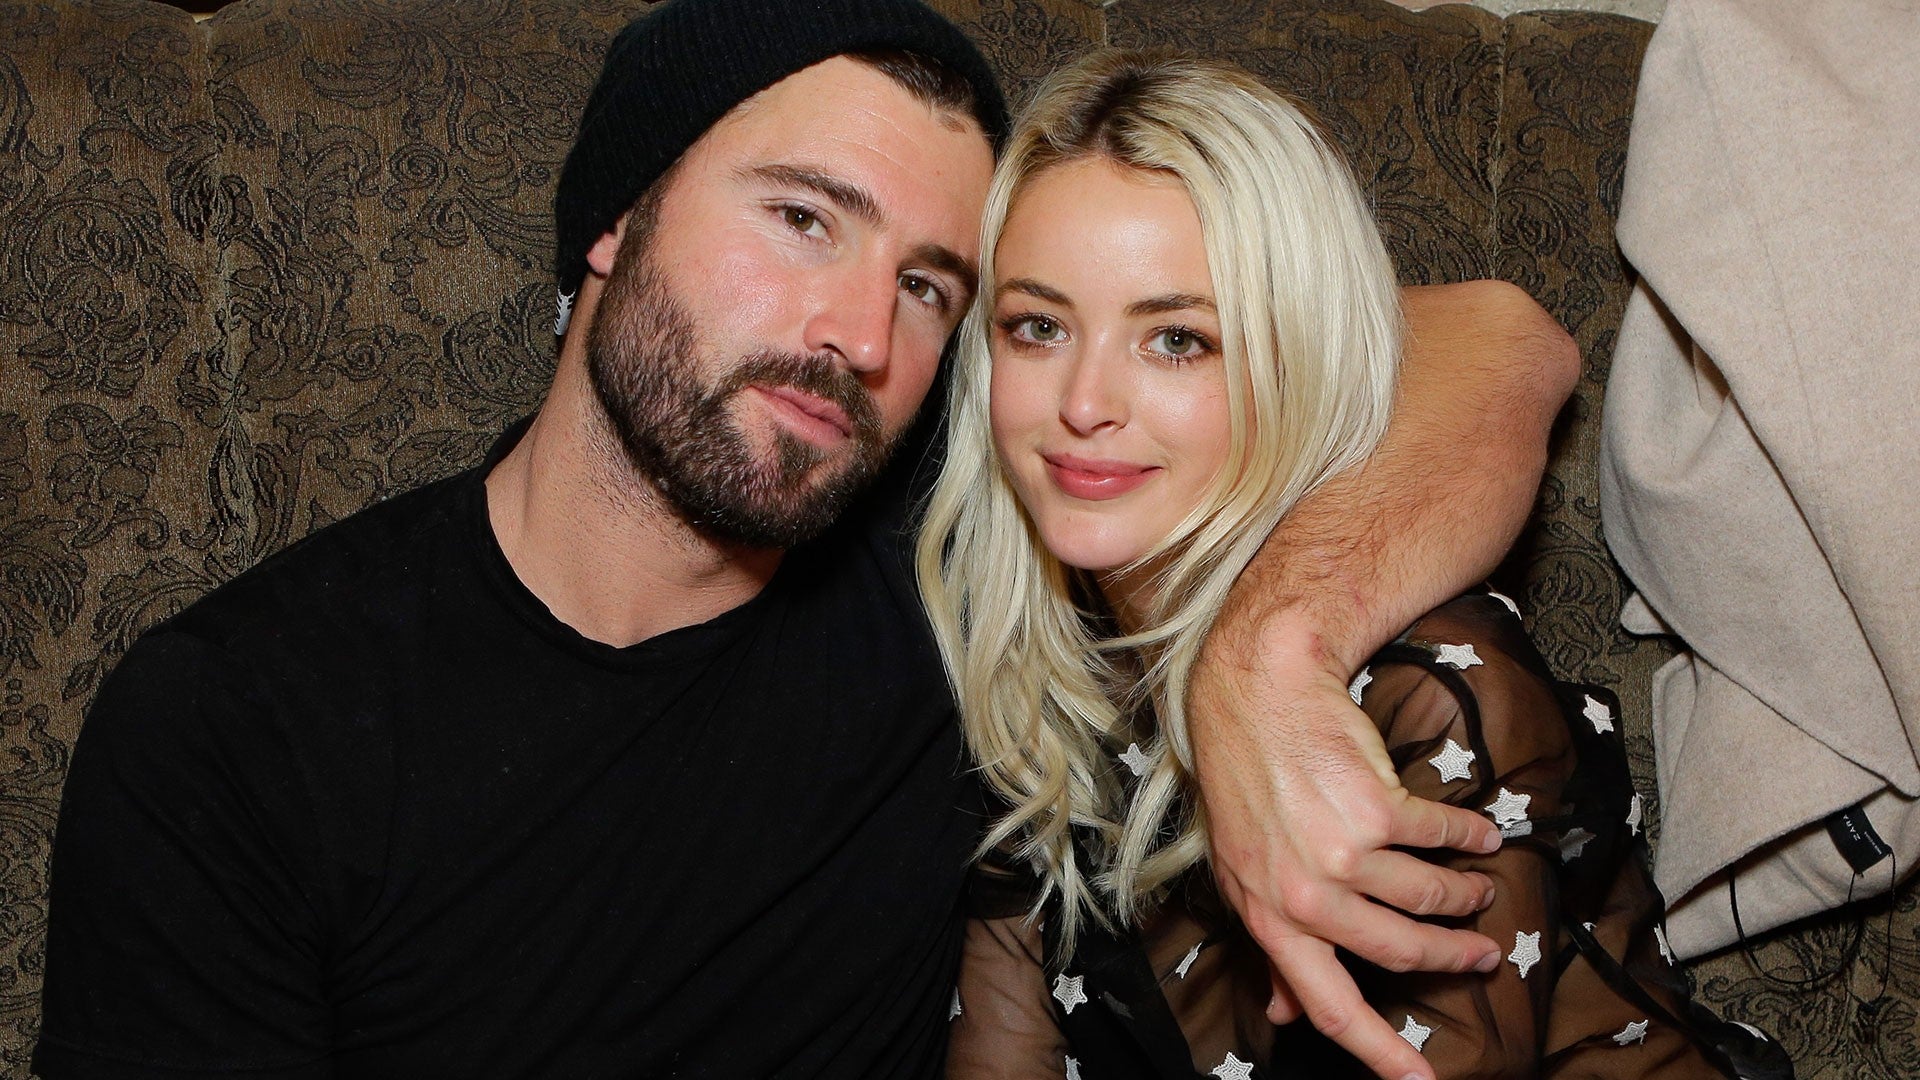 Brody Jenner And Kaitlynn Carter Split After 5 Years